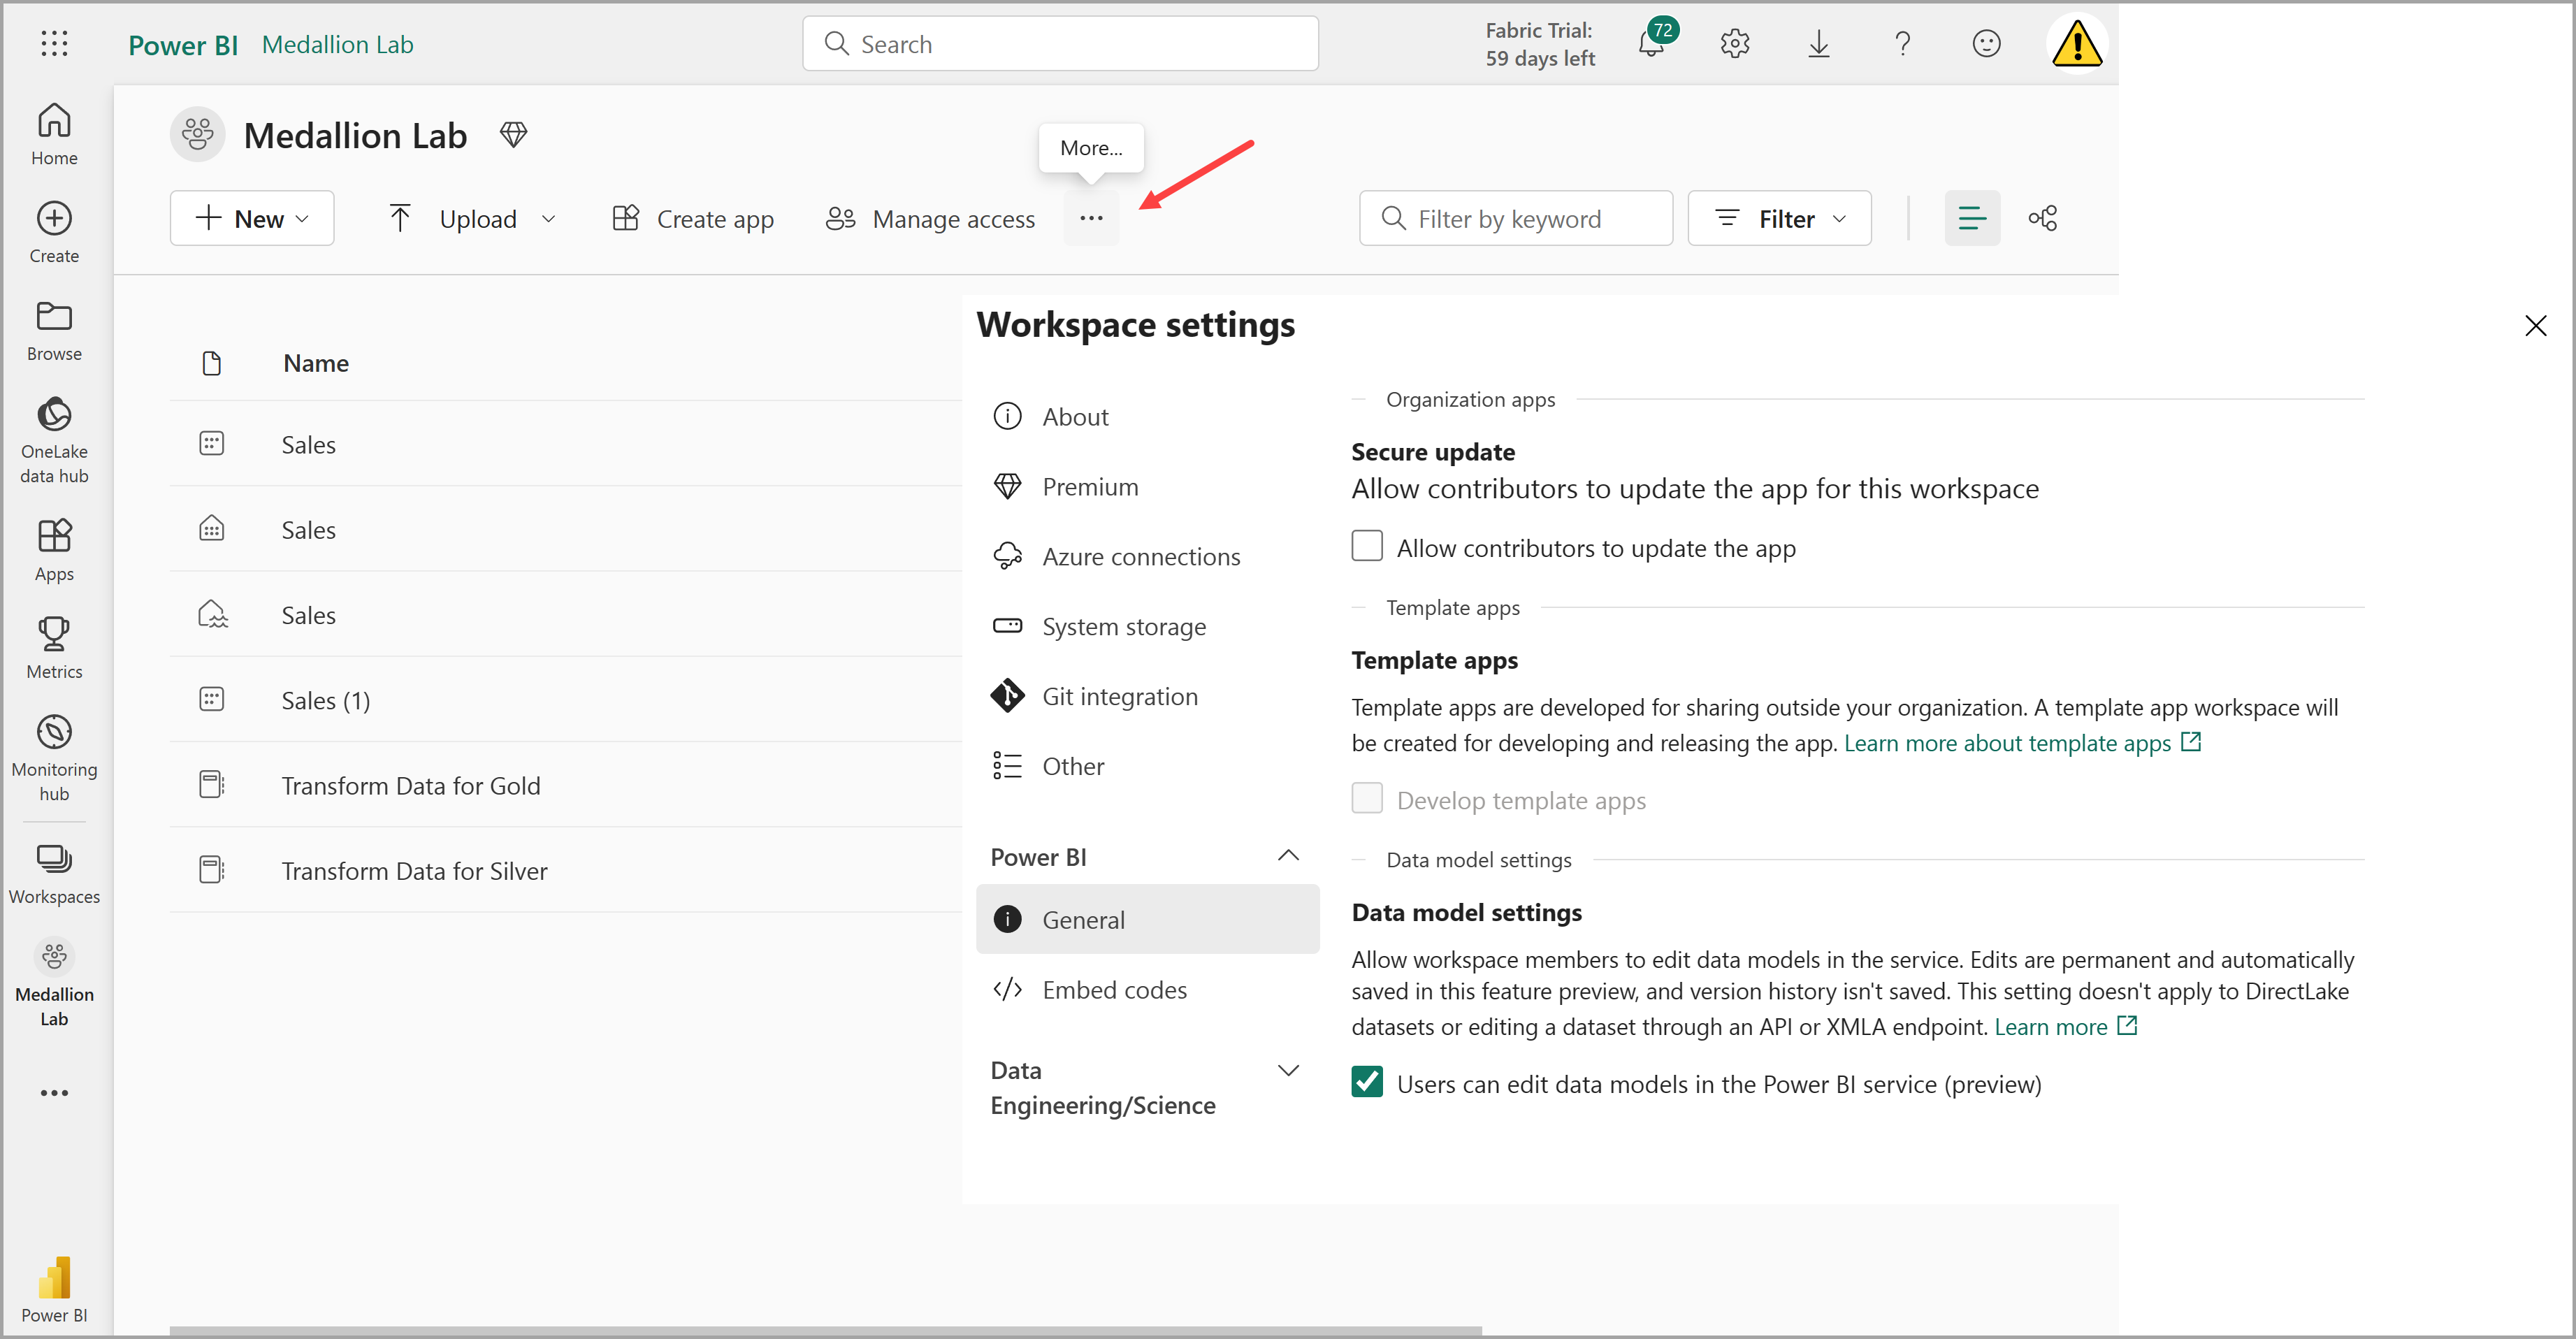 Screenshot of the workspace settings page in Fabric.